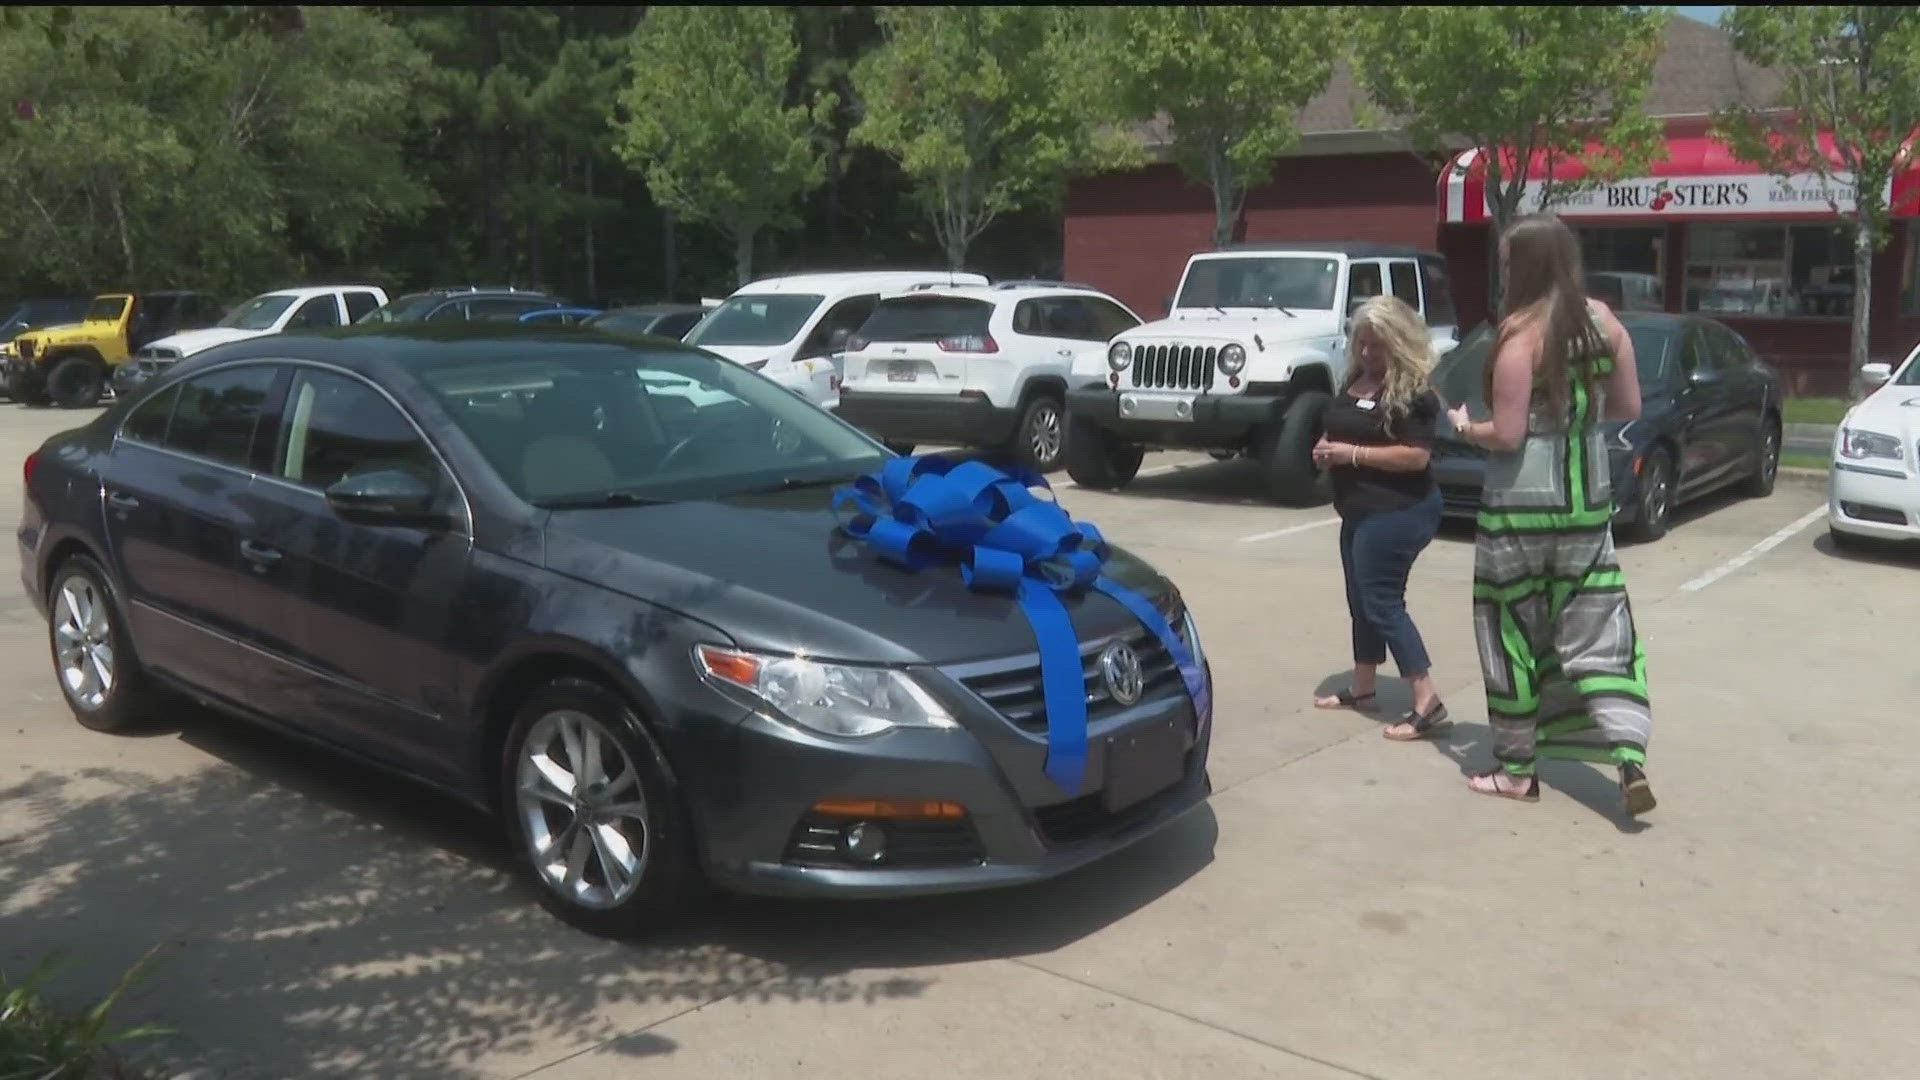 To date, Give Rides has gifted more than 90 cars, impacting nearly 2,000 women and children in metro Atlanta.